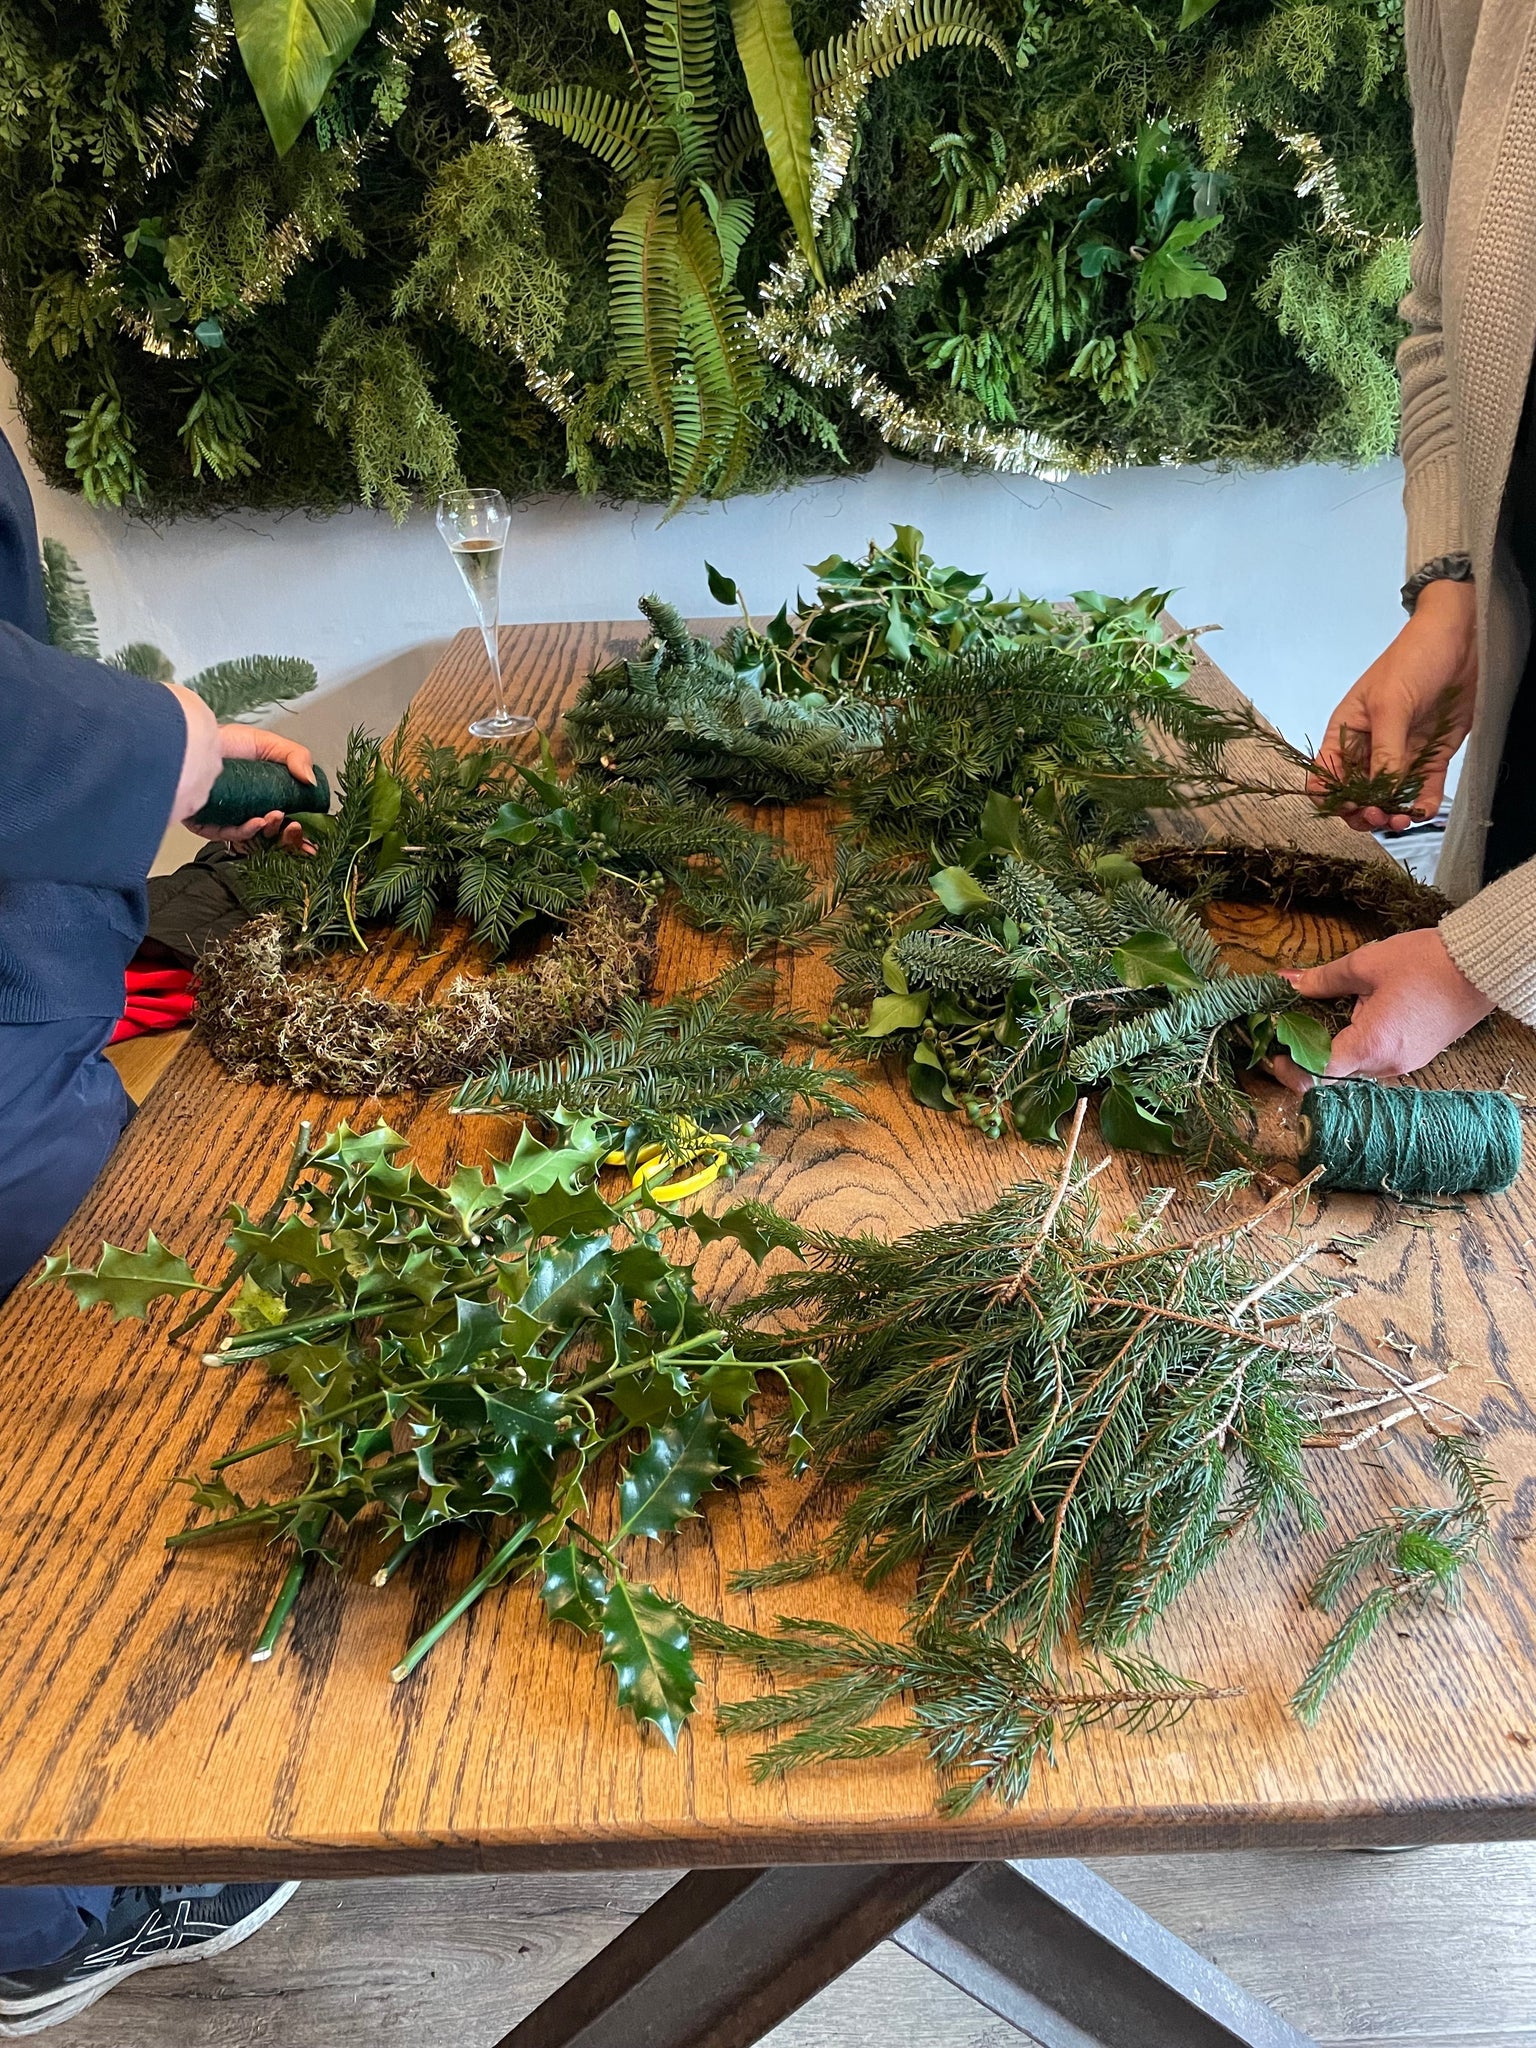 Christmas Wreath Workshop – Thursday 30th November, Starting @ 11am (£75 per person) 2.5 hours